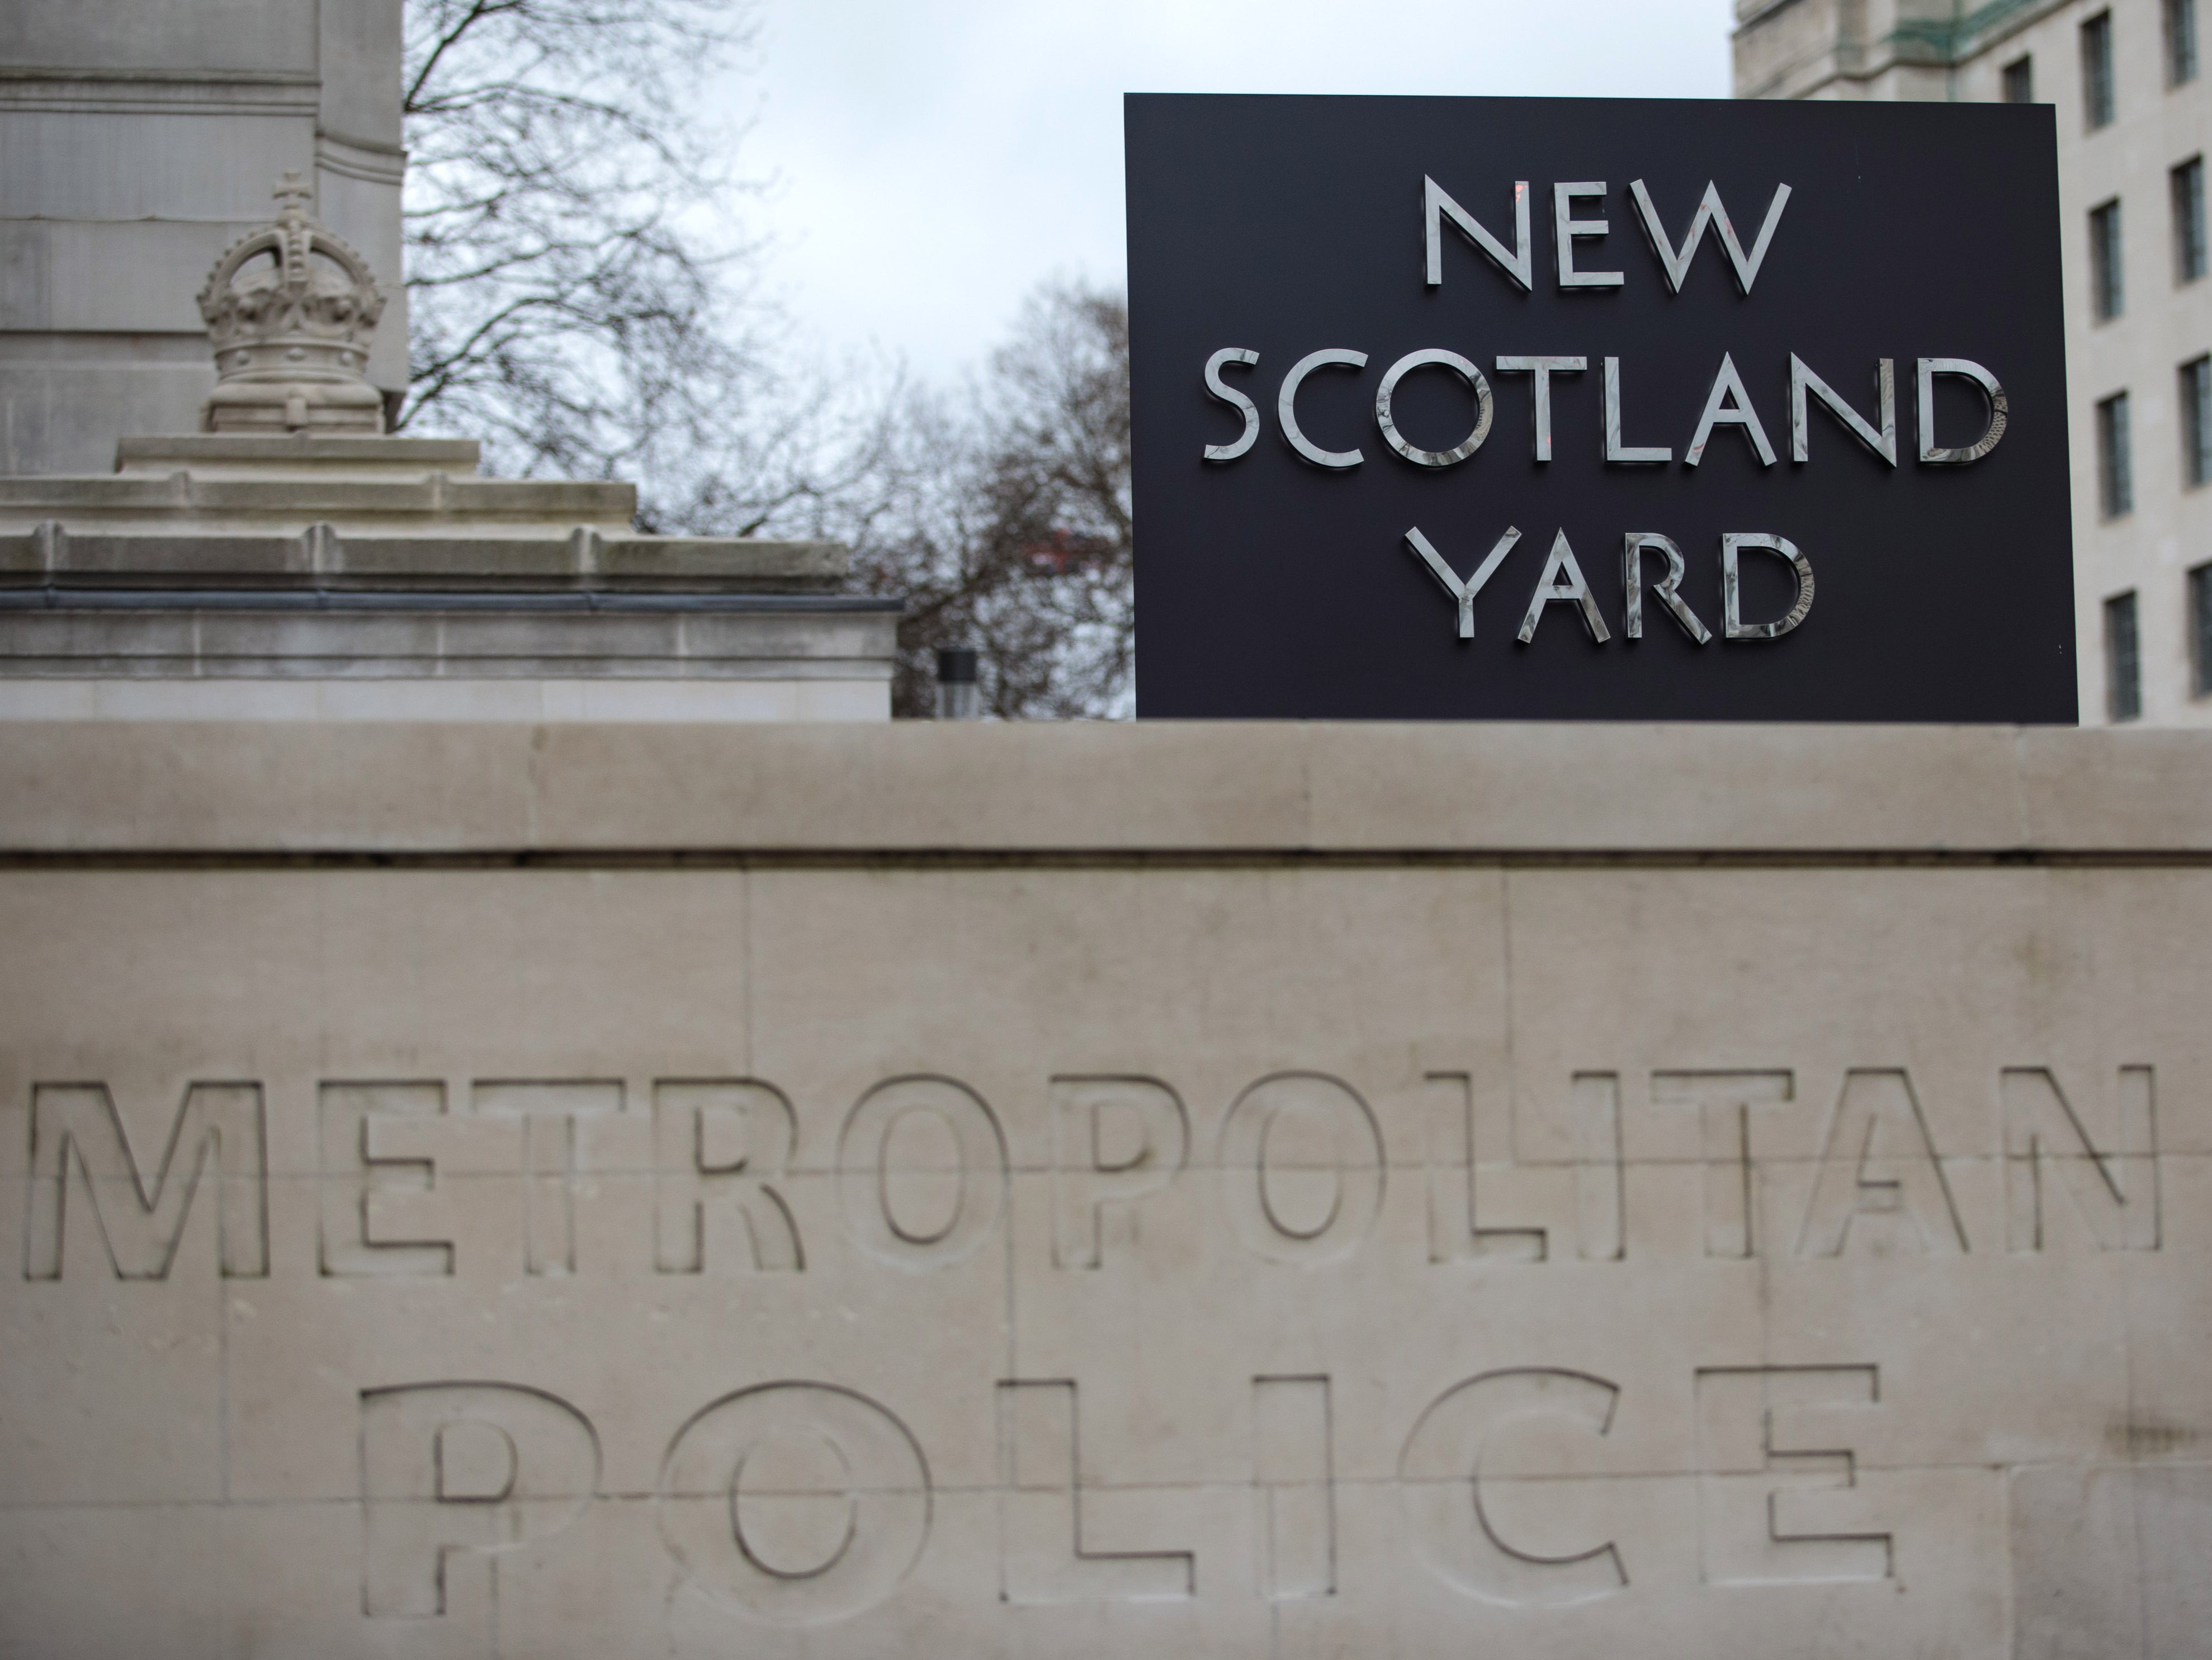 The charge comes following a series of cases that have shaken public confidence in policing